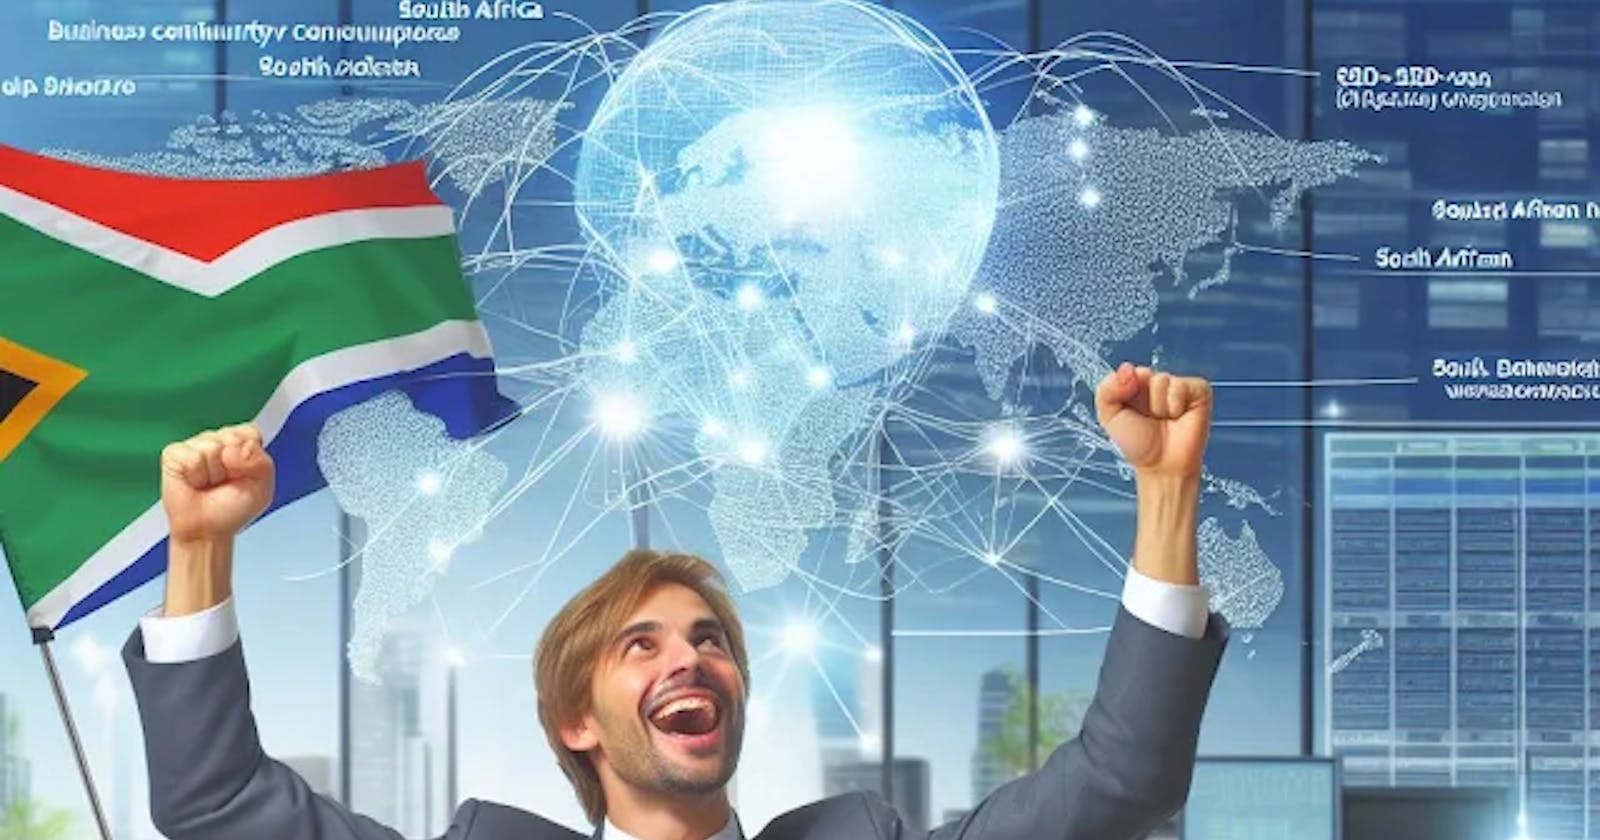 Fusion's SD-WAN: Revolutionizing Network Reliability and Business Continuity in South Africa